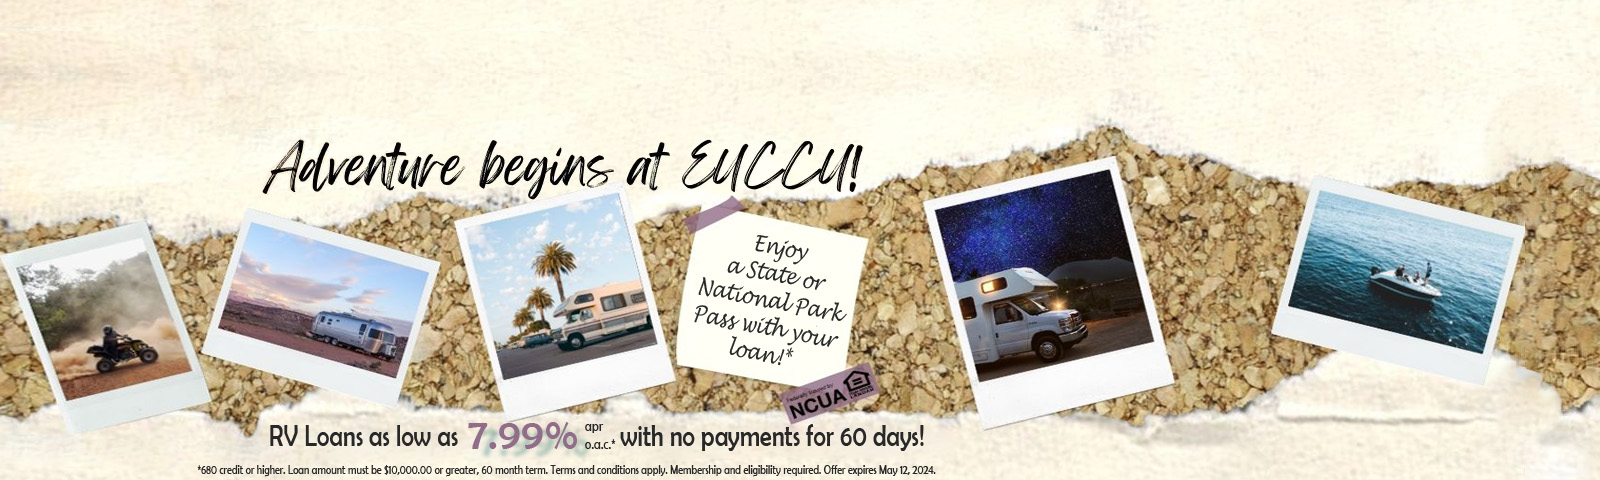 Enjoy a State or National Park Pass with your loan!* RV Loans as low as 7.99% apr o.a.c.* with no payments for 60 days! *680 credit or higher. Loan amount must bet $10,000.00 or greater, 60 month term. Terms and conditions apply. Membership and eligibility required. Offer expire May 12, 2024.